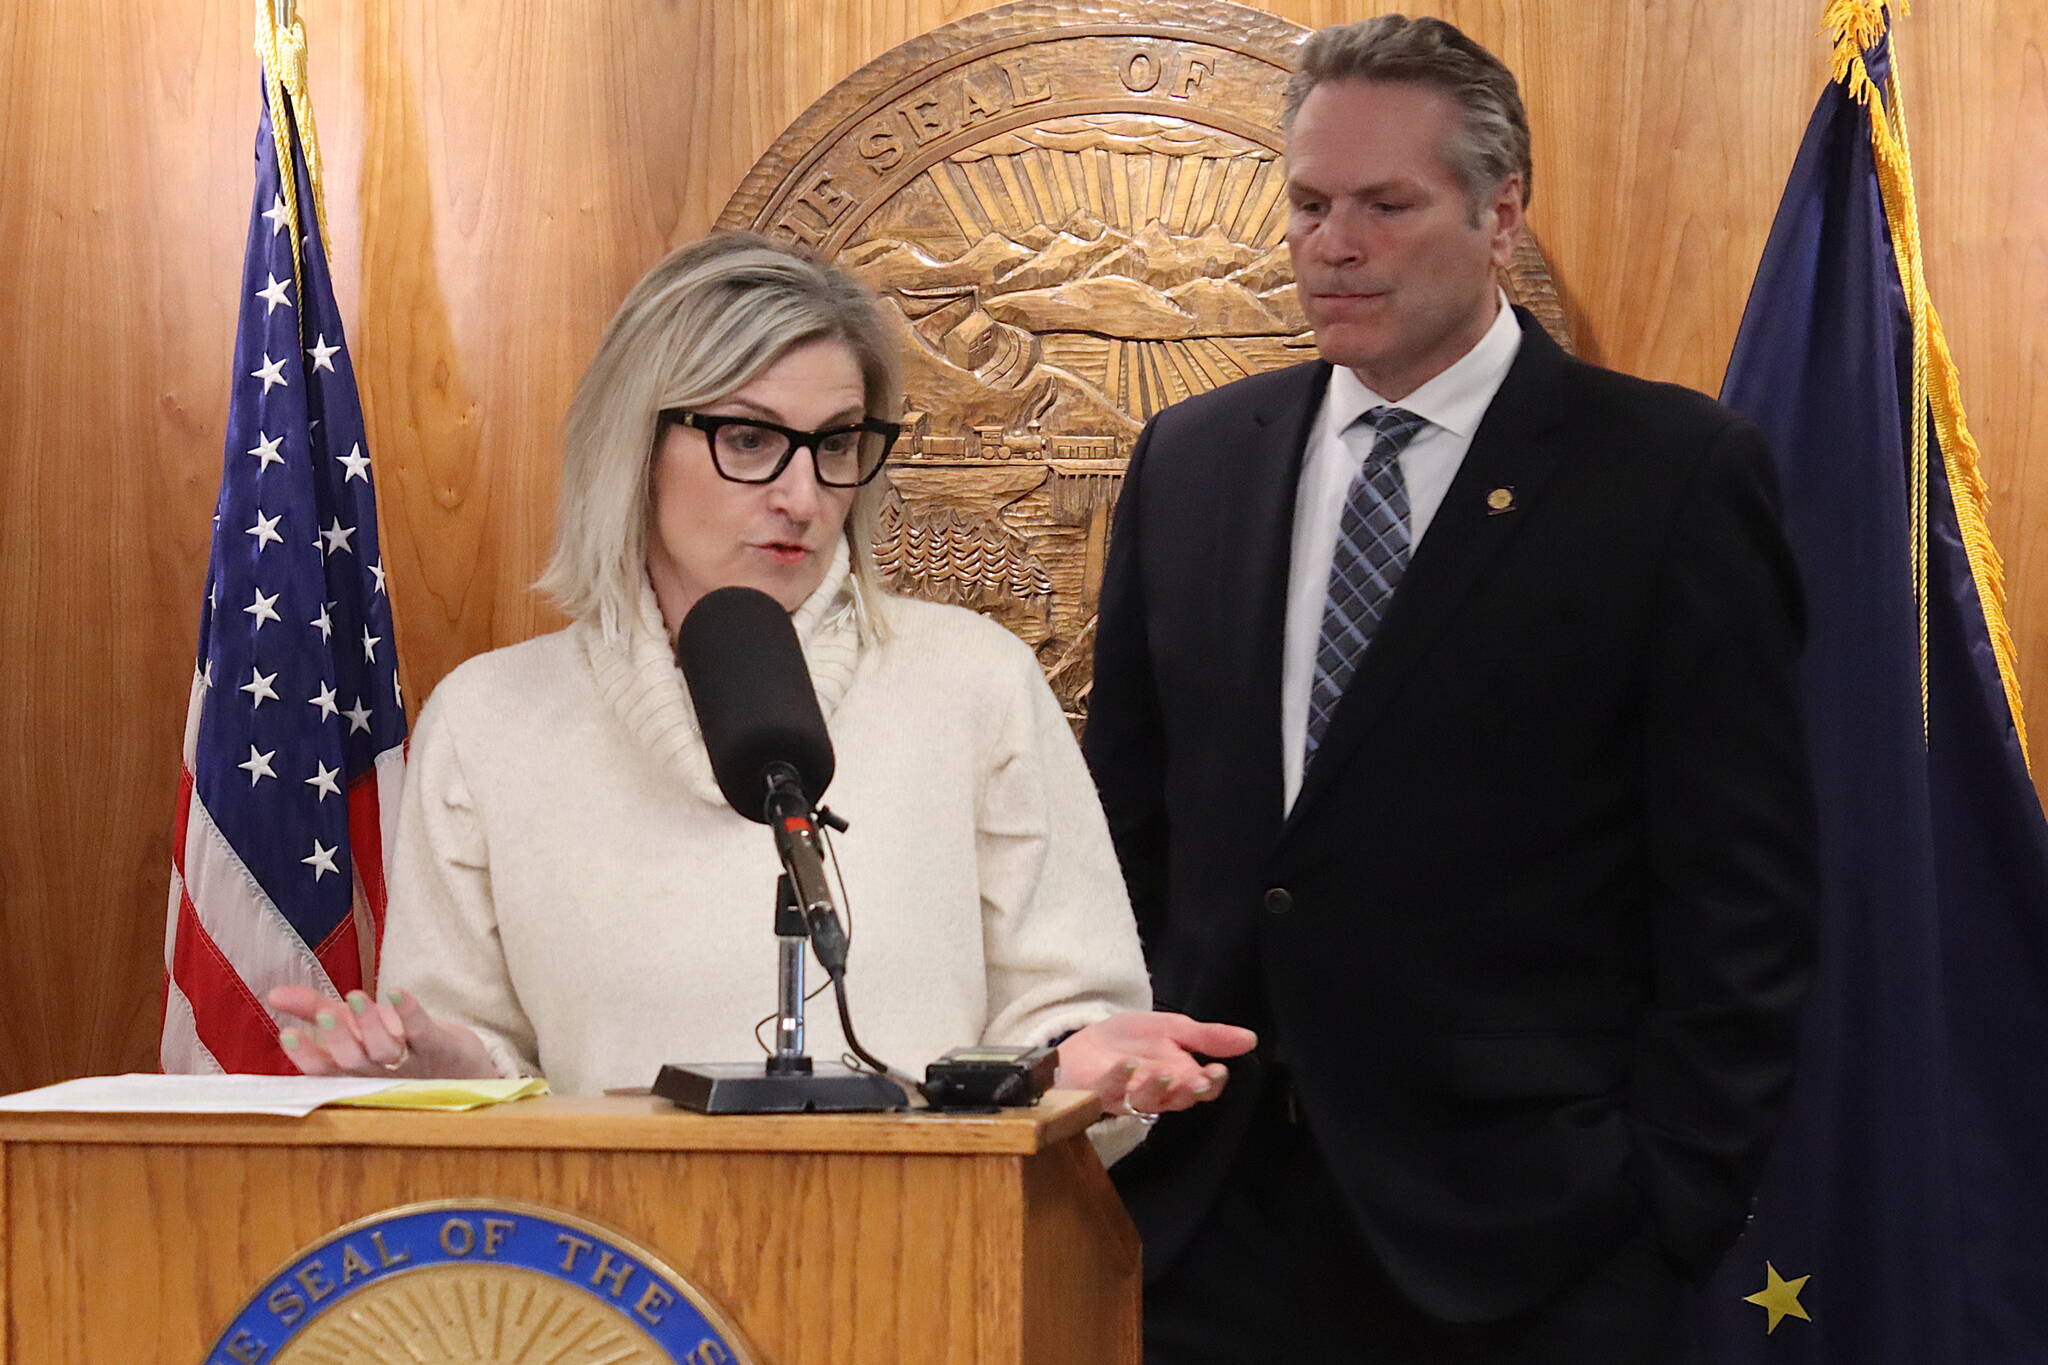 Alaska Department of Education and Early Development Commissioner Deena Bishop and Gov. Mike Dunleavy discuss his veto of an education bill during a press conference Friday at the Alaska State Capitol. (Mark Sabbatini / Juneau Empire file photo)